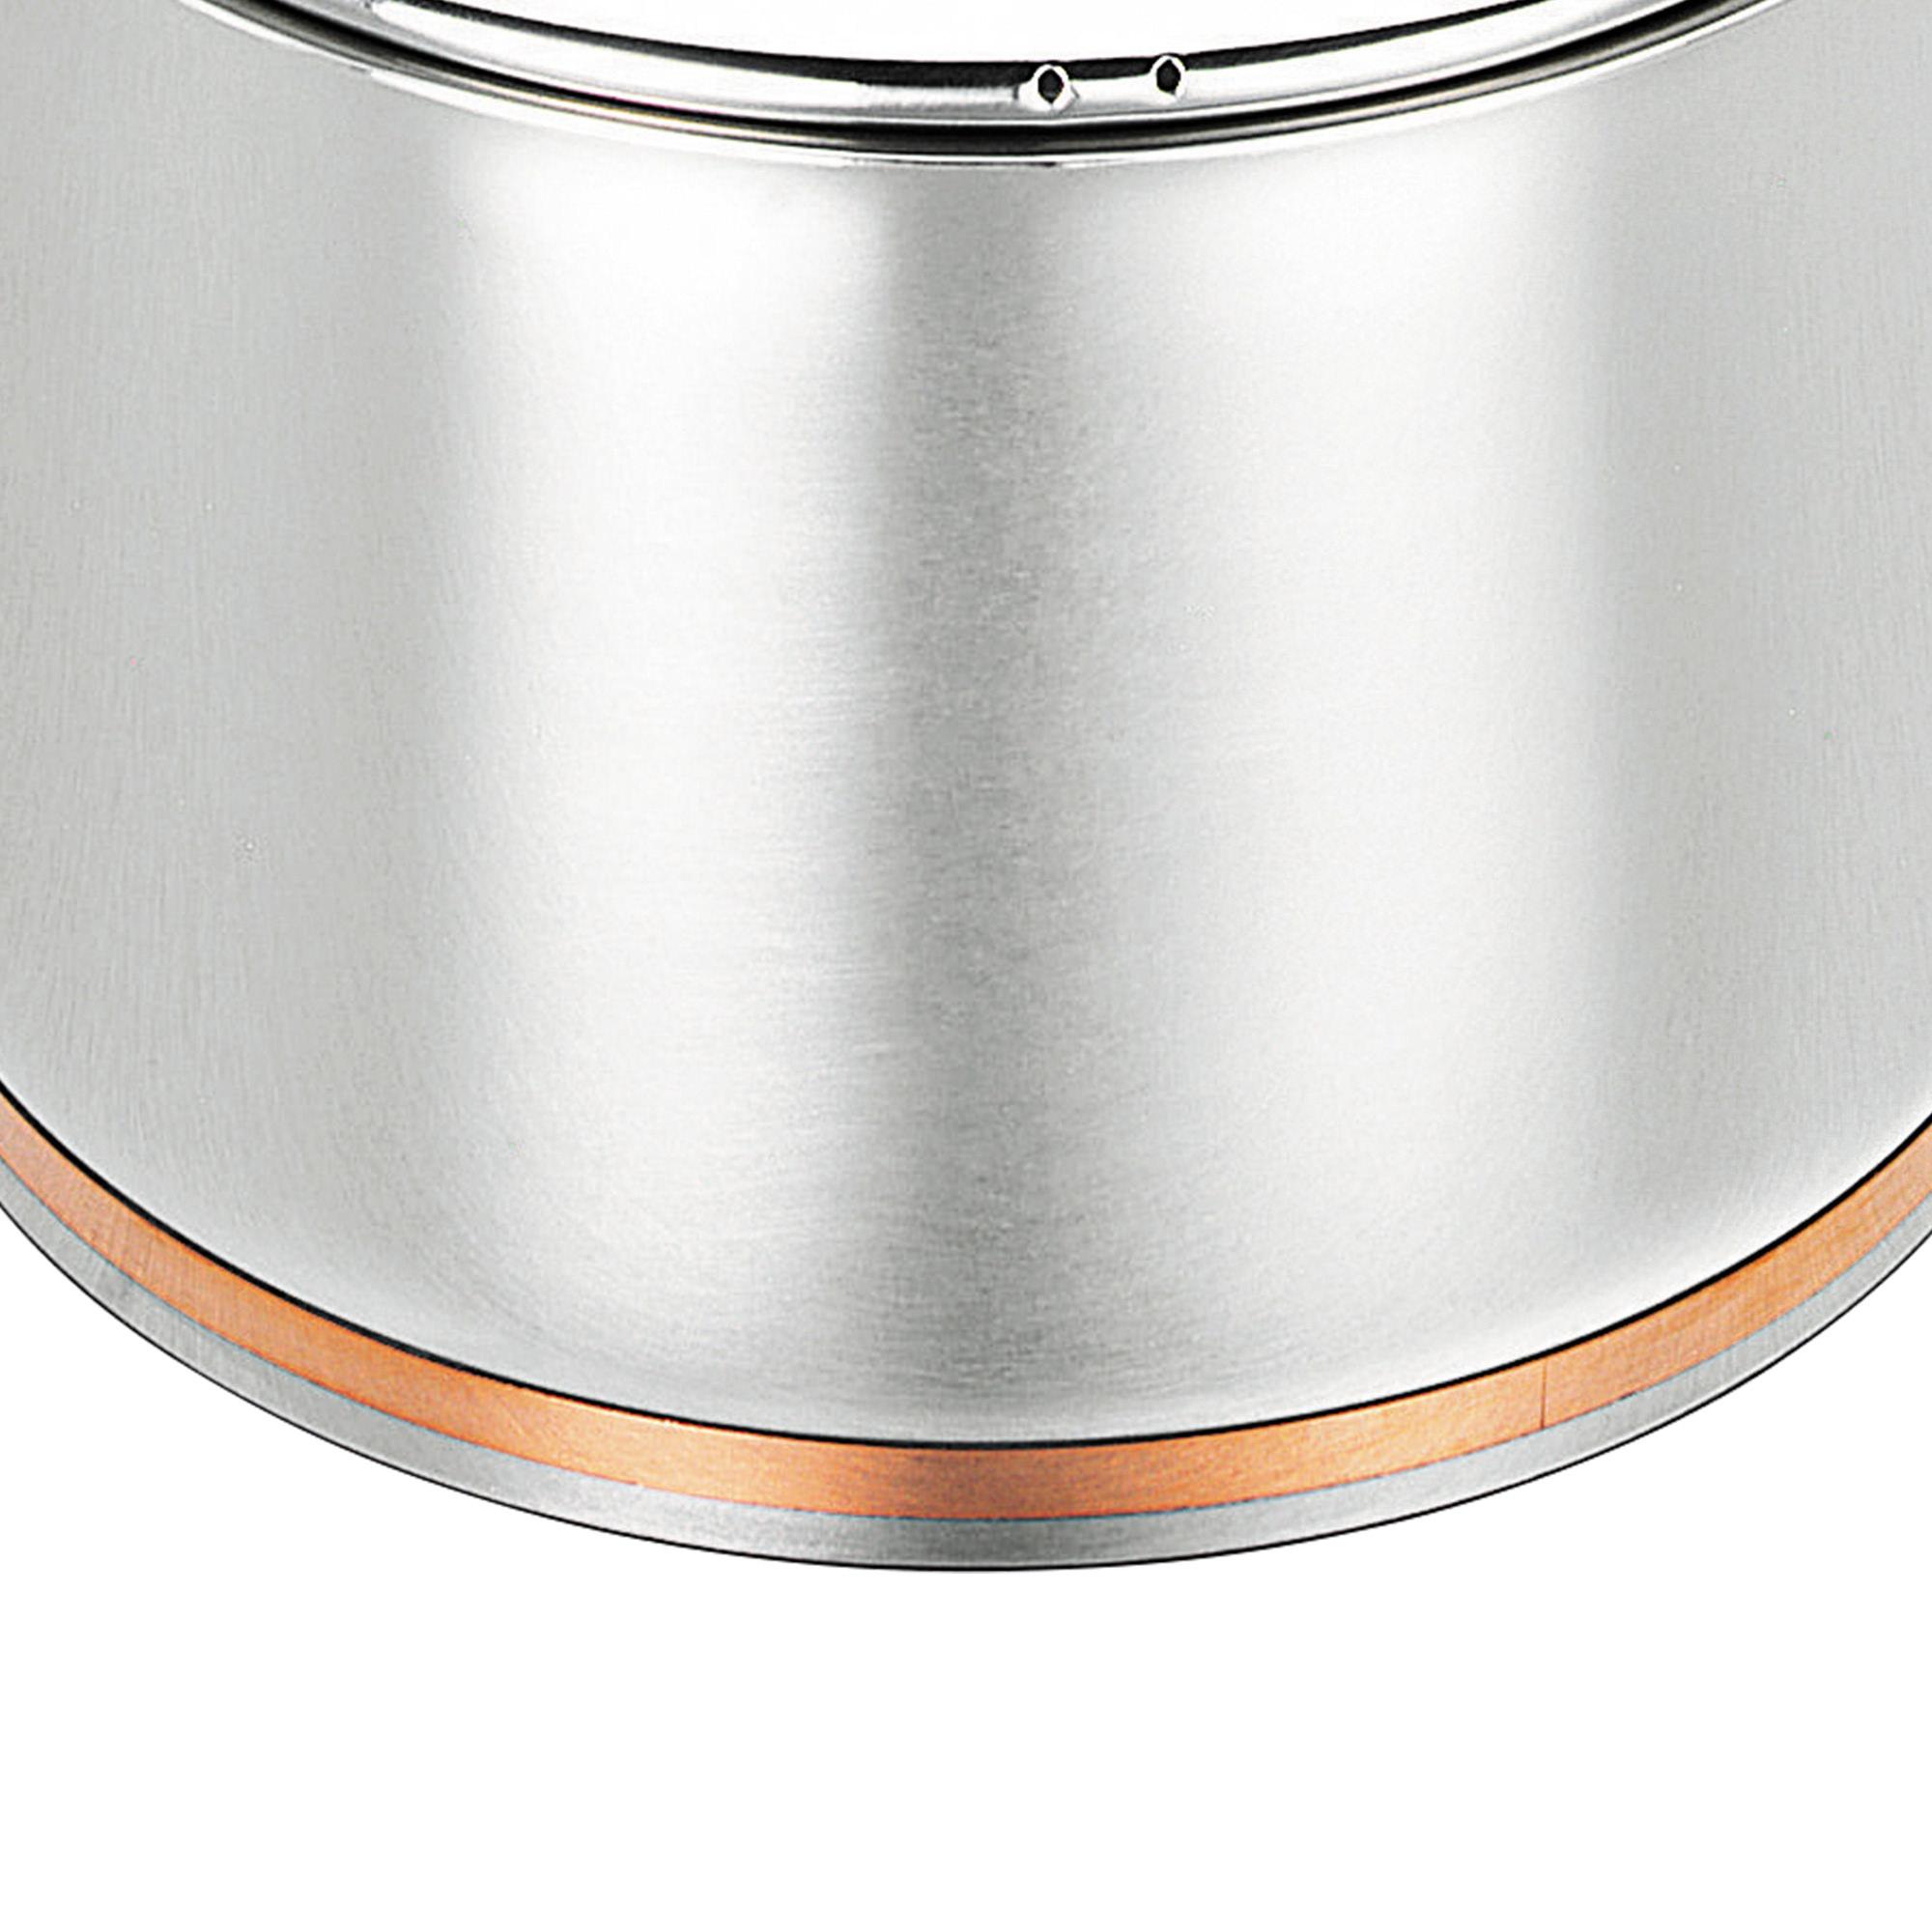 Scanpan Coppernox Stainless Steel Covered Saucepan 16cm - 1.8L Image 4